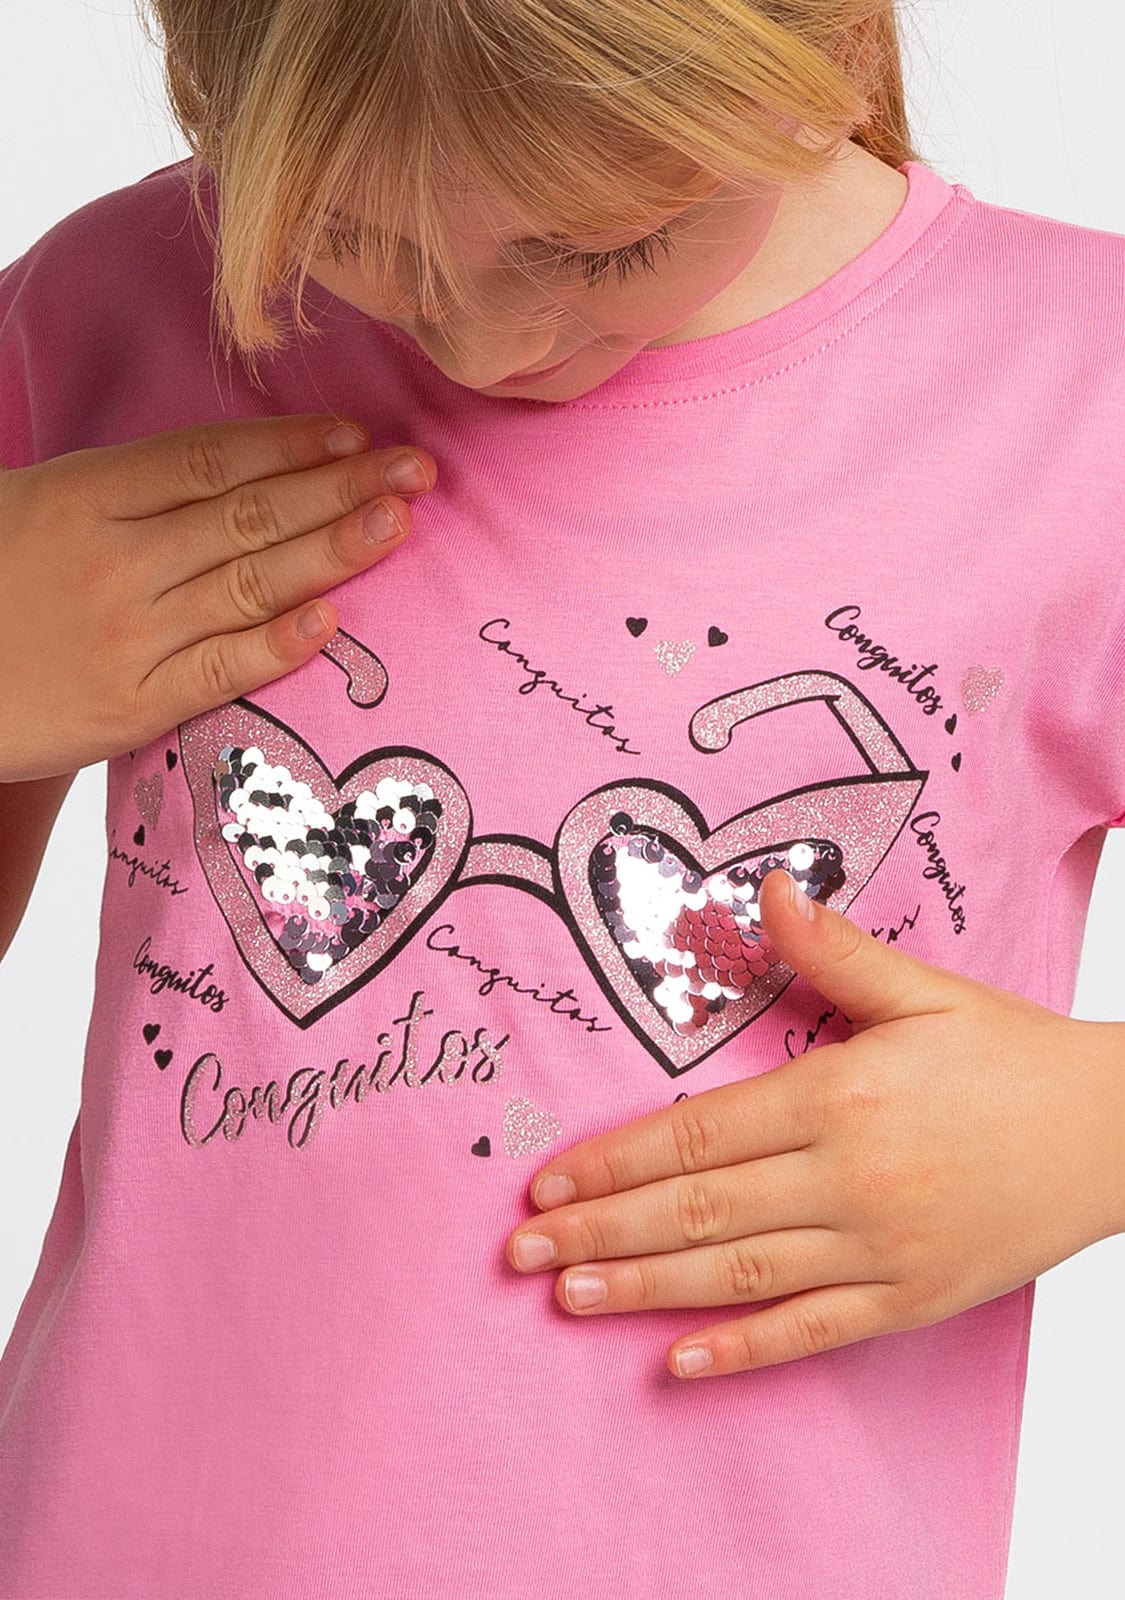 CONGUITOS TEXTIL Clothing Girl's Pink Glasses-Heart T-Shirt